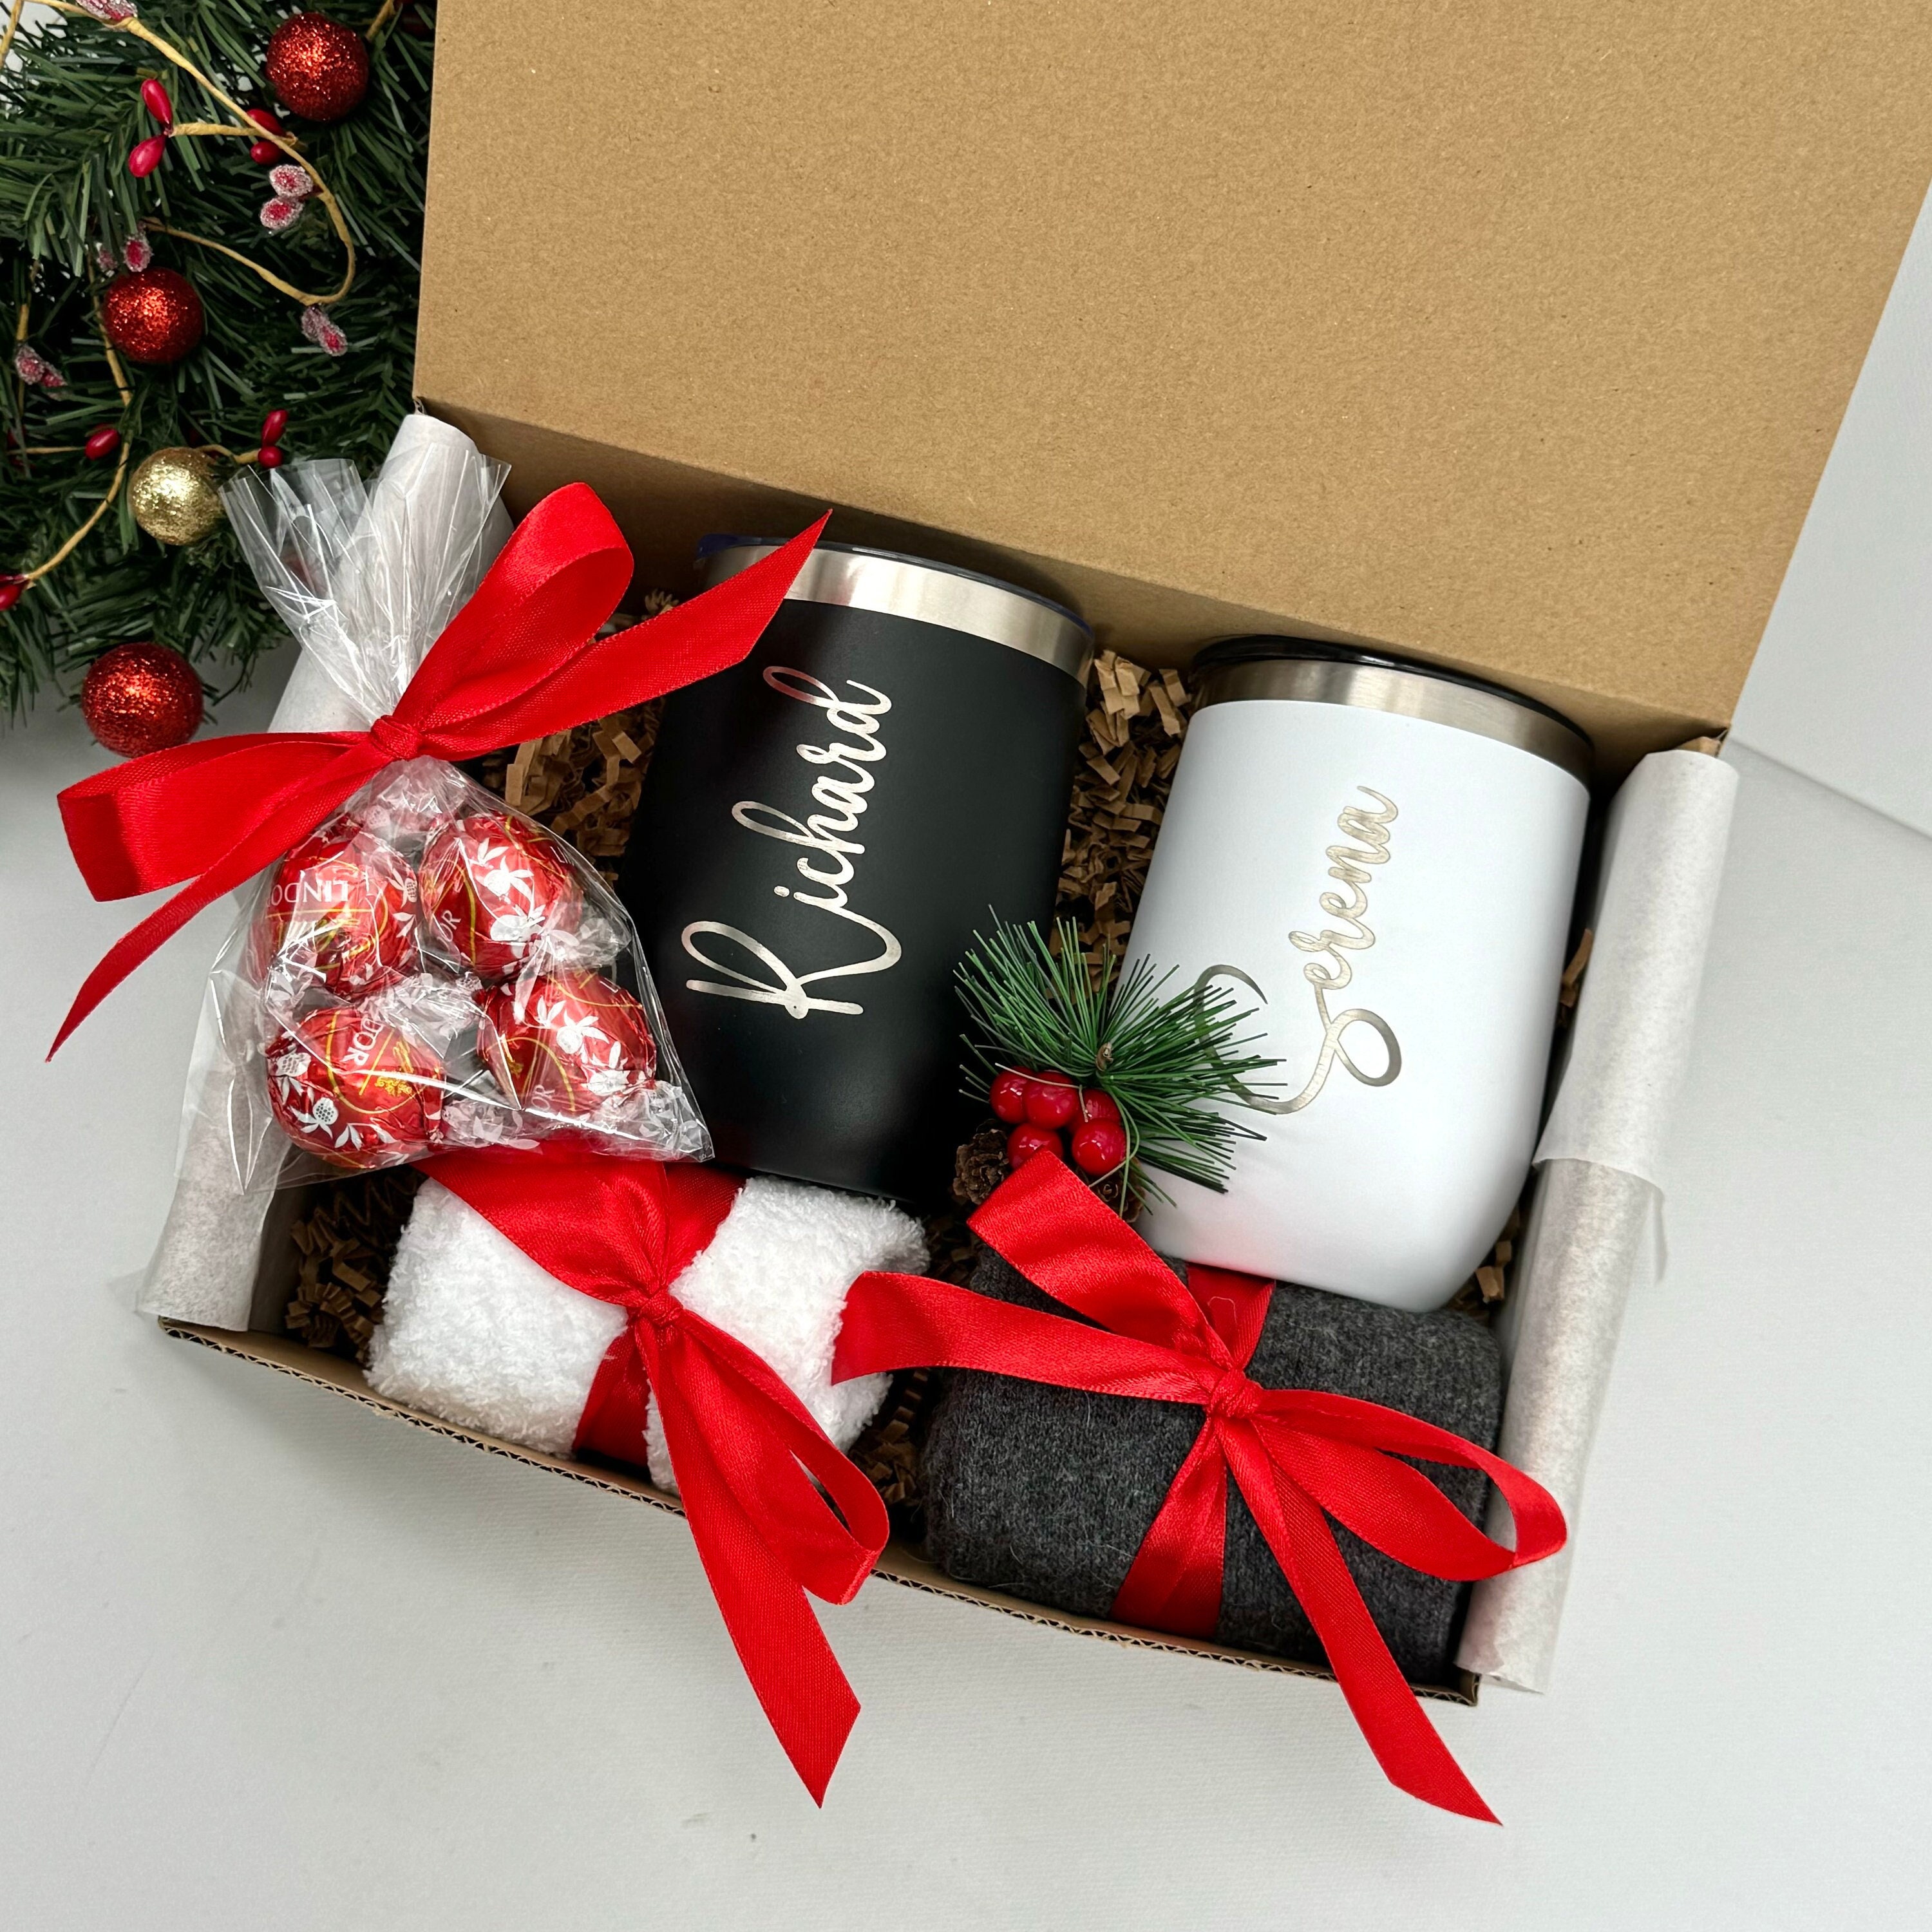 Christmas Gift for Men & Women  Hygge Holiday Gift Basket – Happy